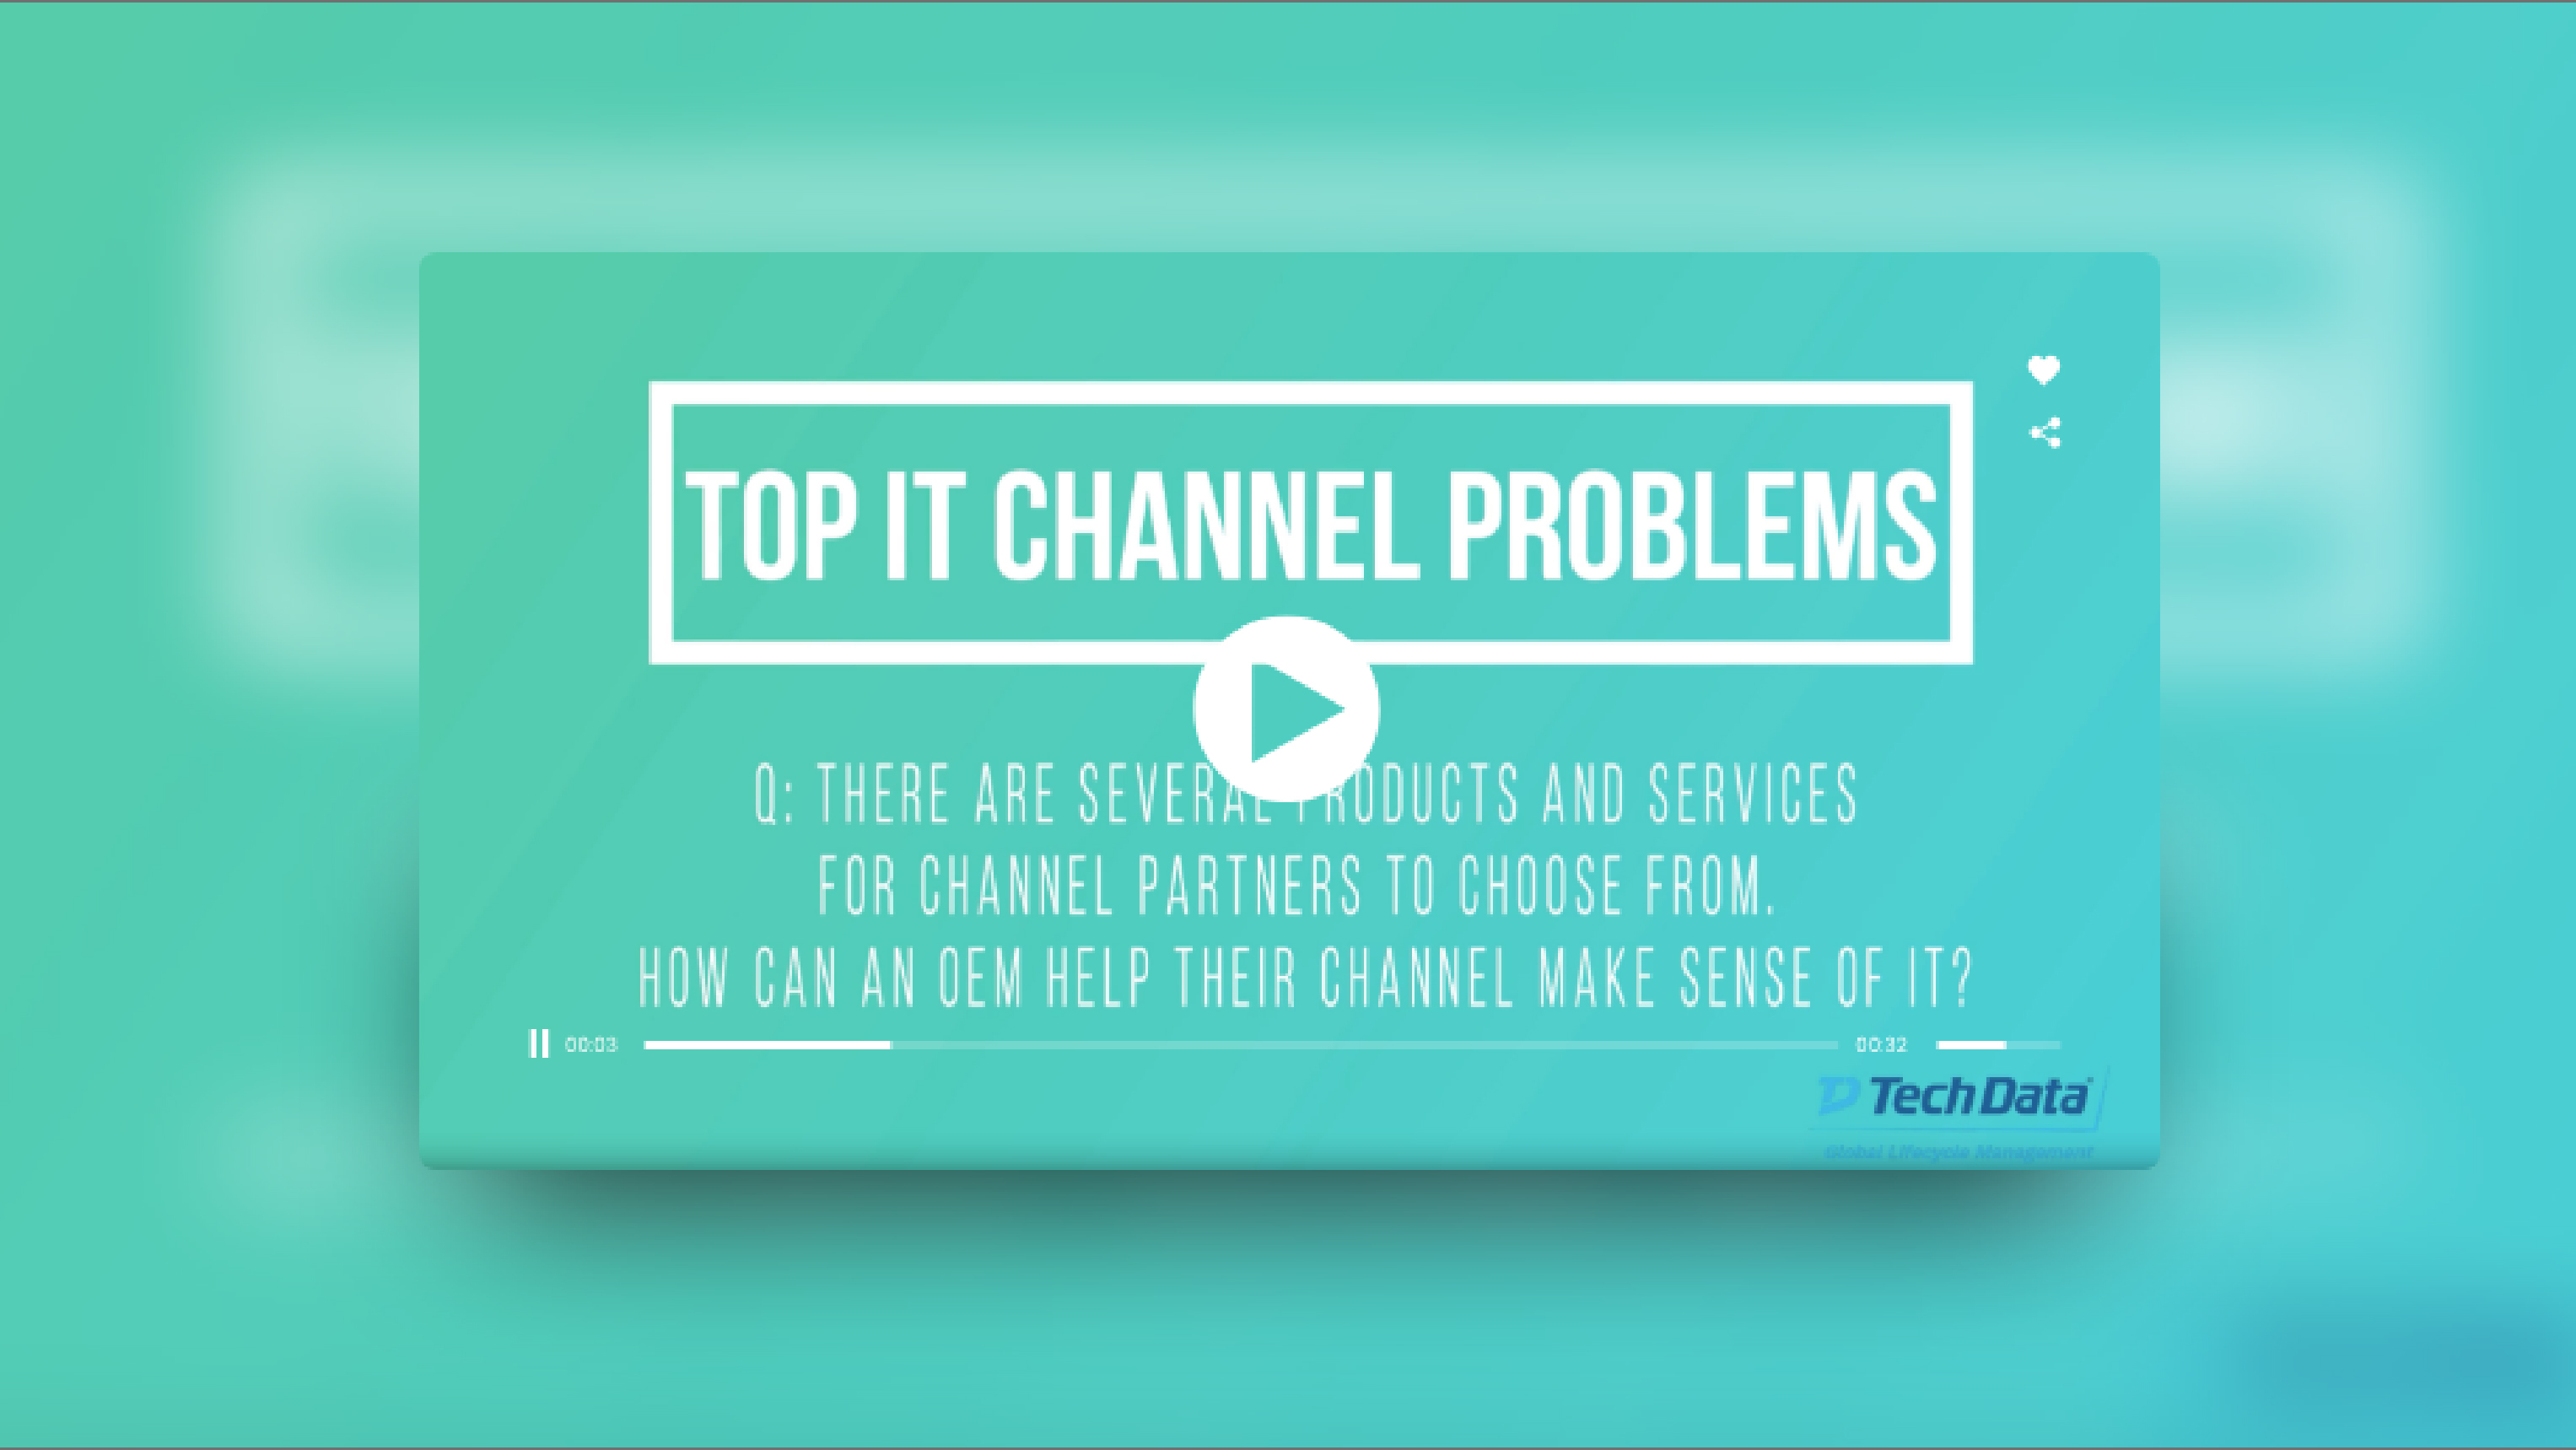 Top IT Channel Problems: Specialization